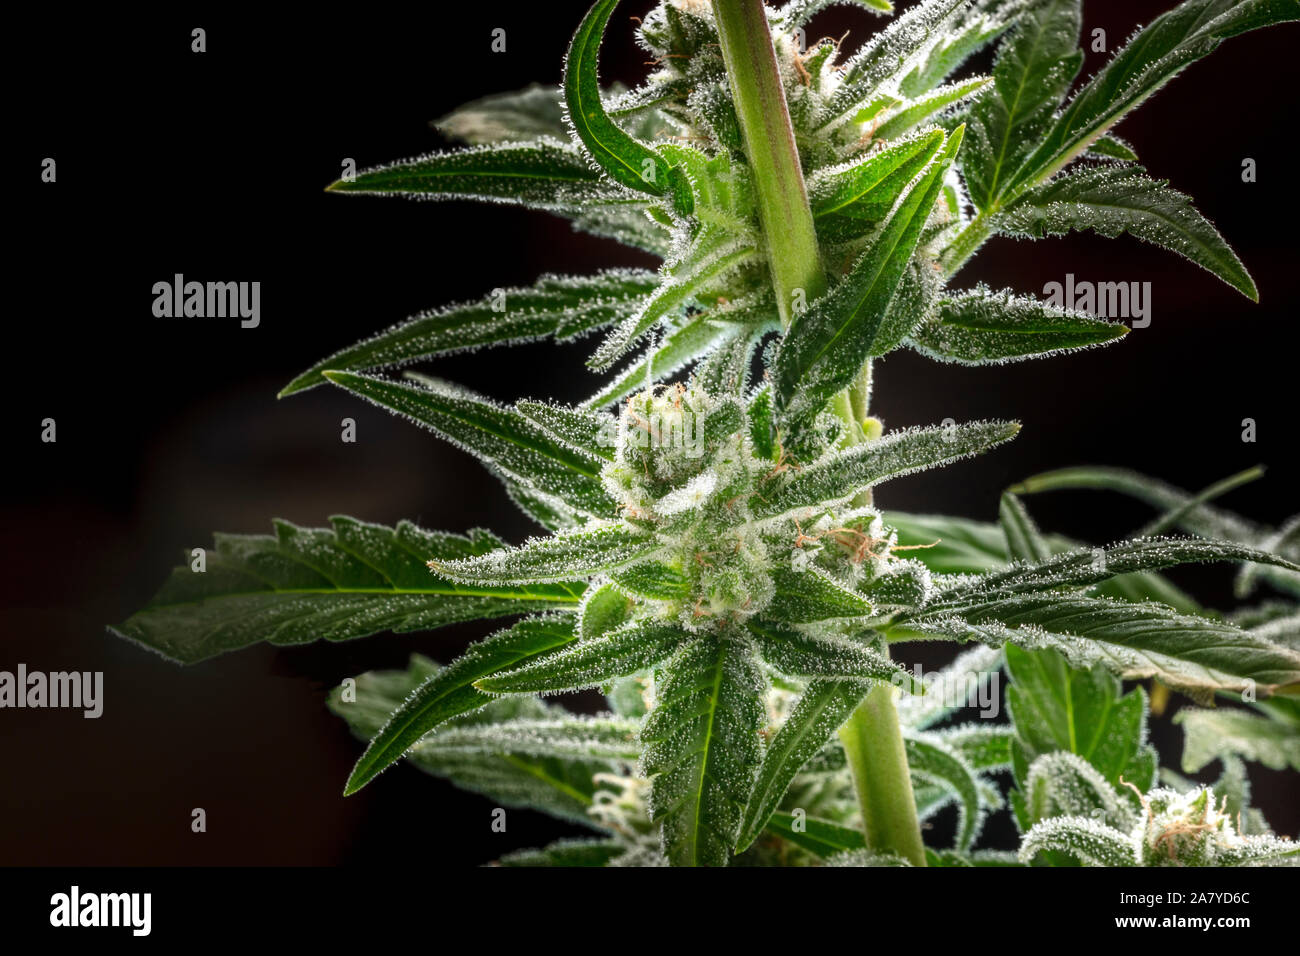 A close-up of flowering cannabis buds with stigmas and trichomes before harvest, macro shot on a black bakground Stock Photo